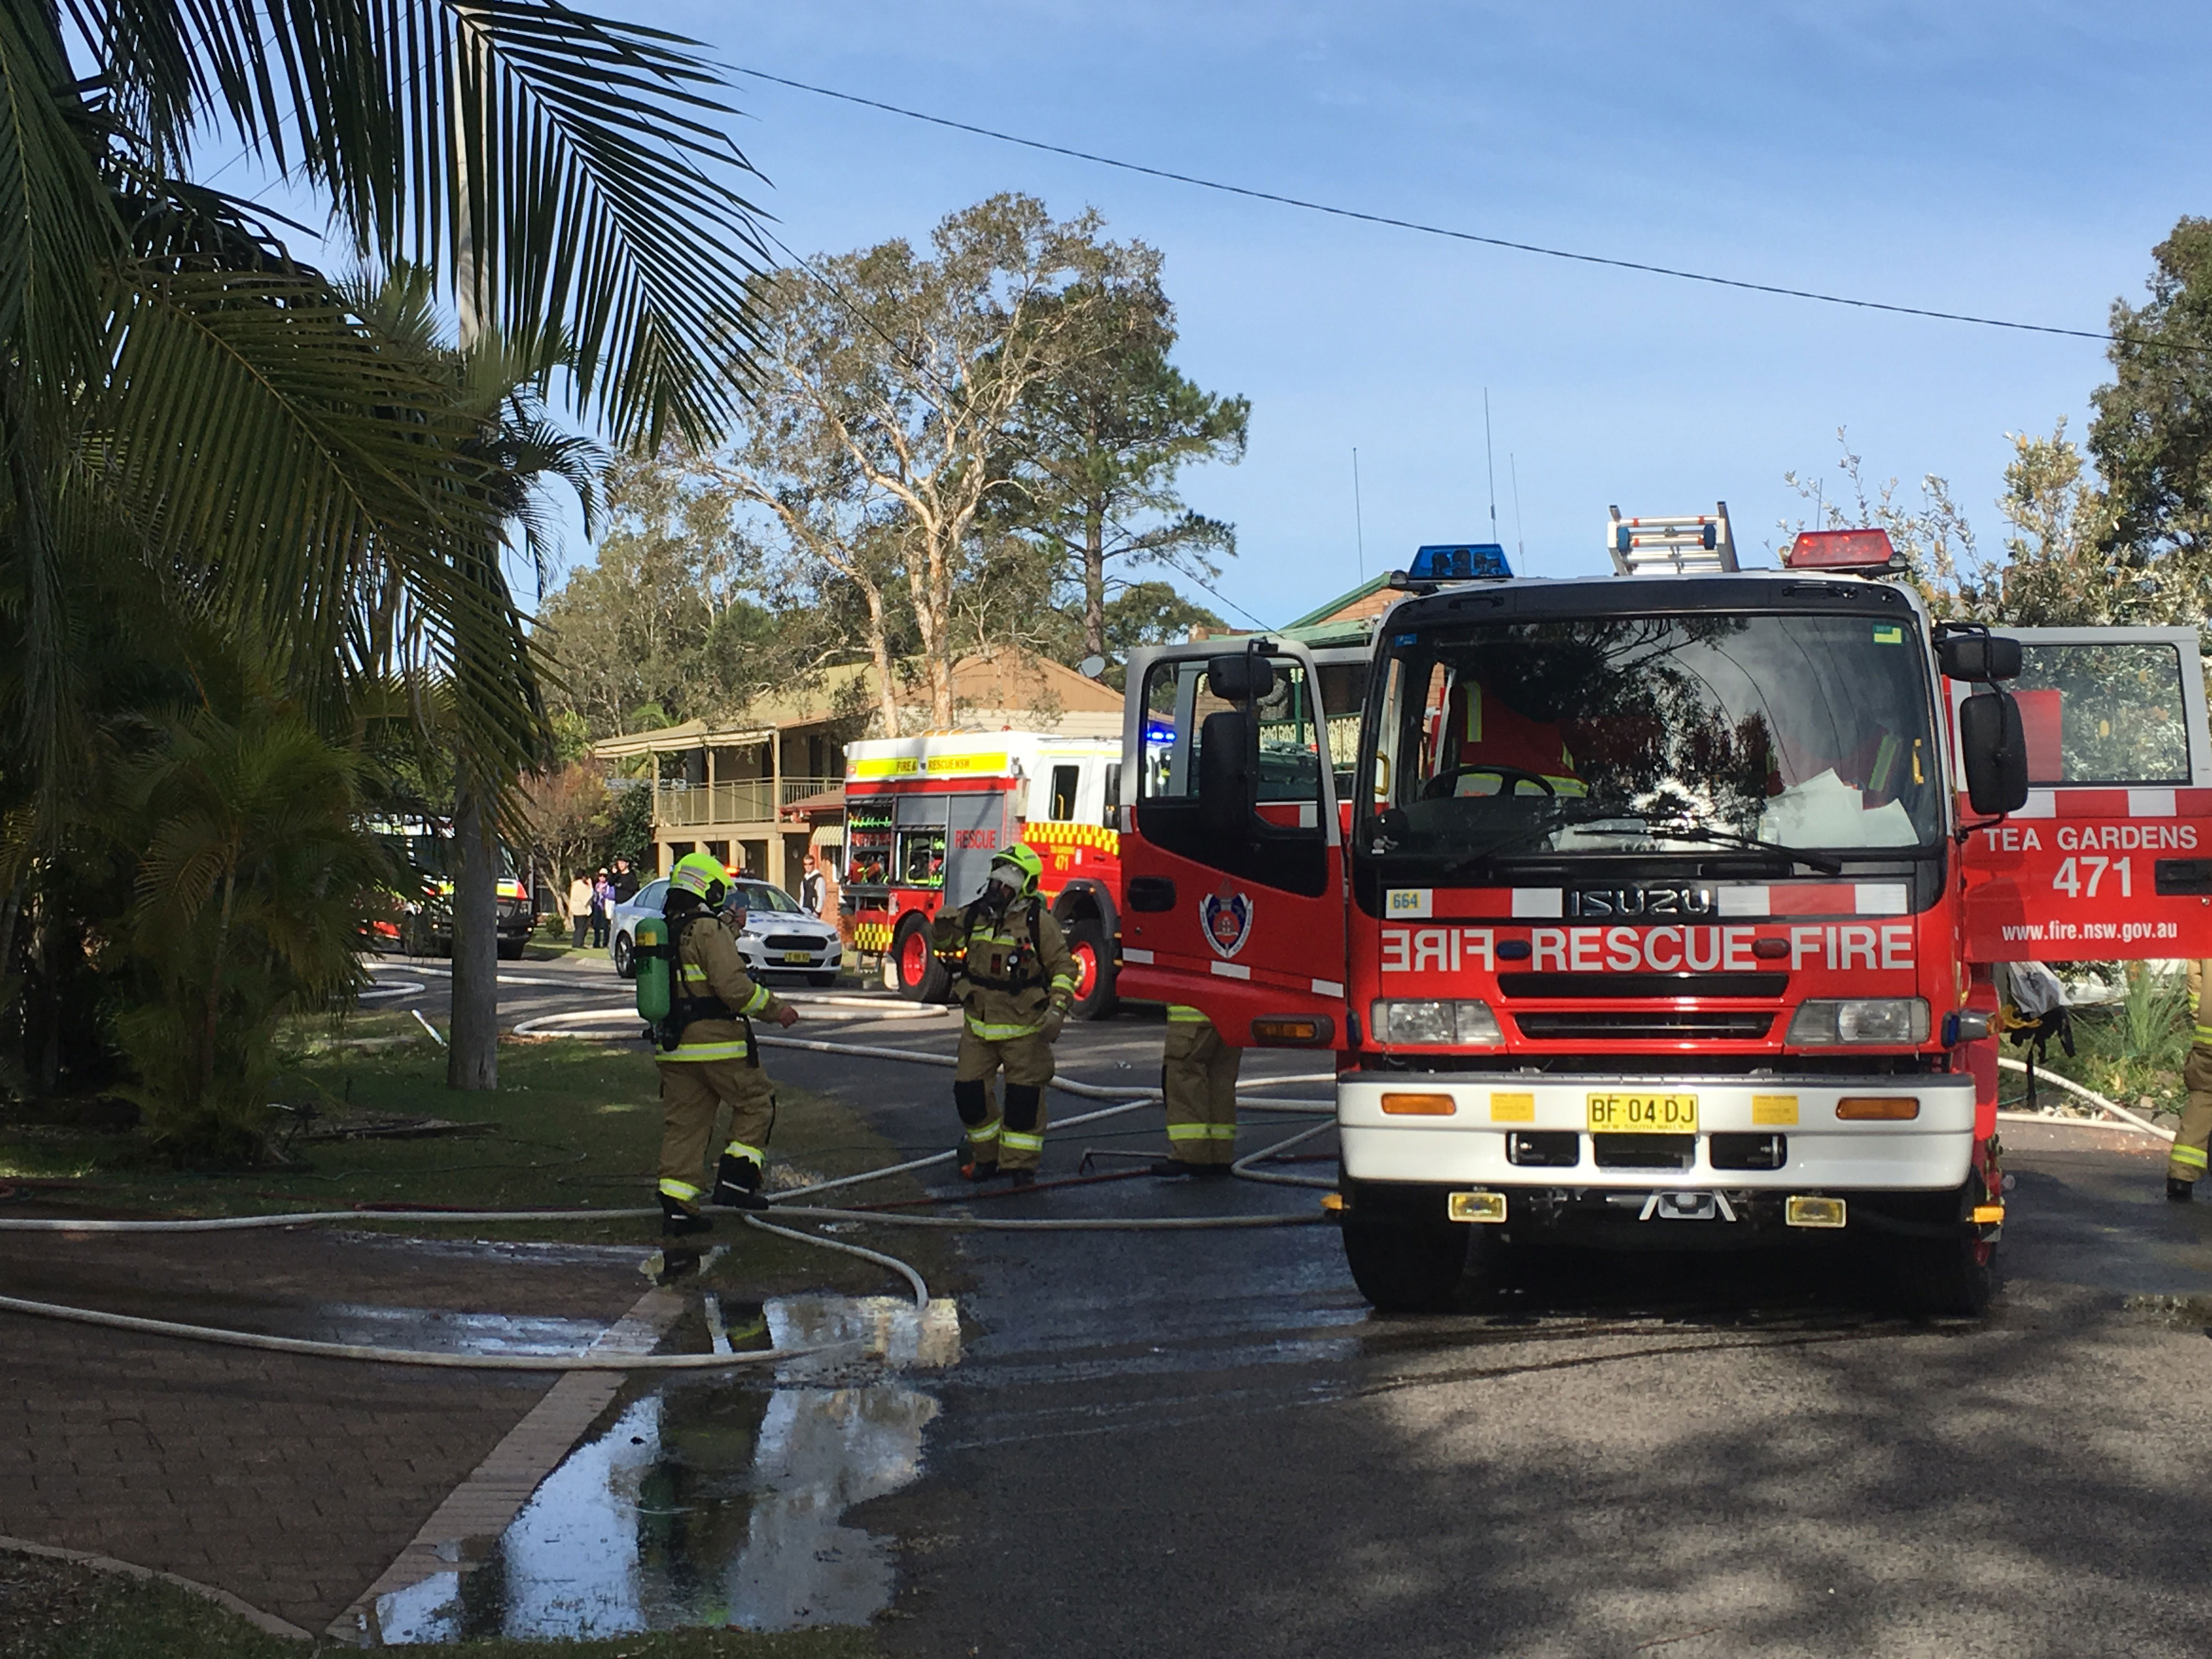 NSW Fire and Rescue crews from Tea Gardens attended the house fire quickly